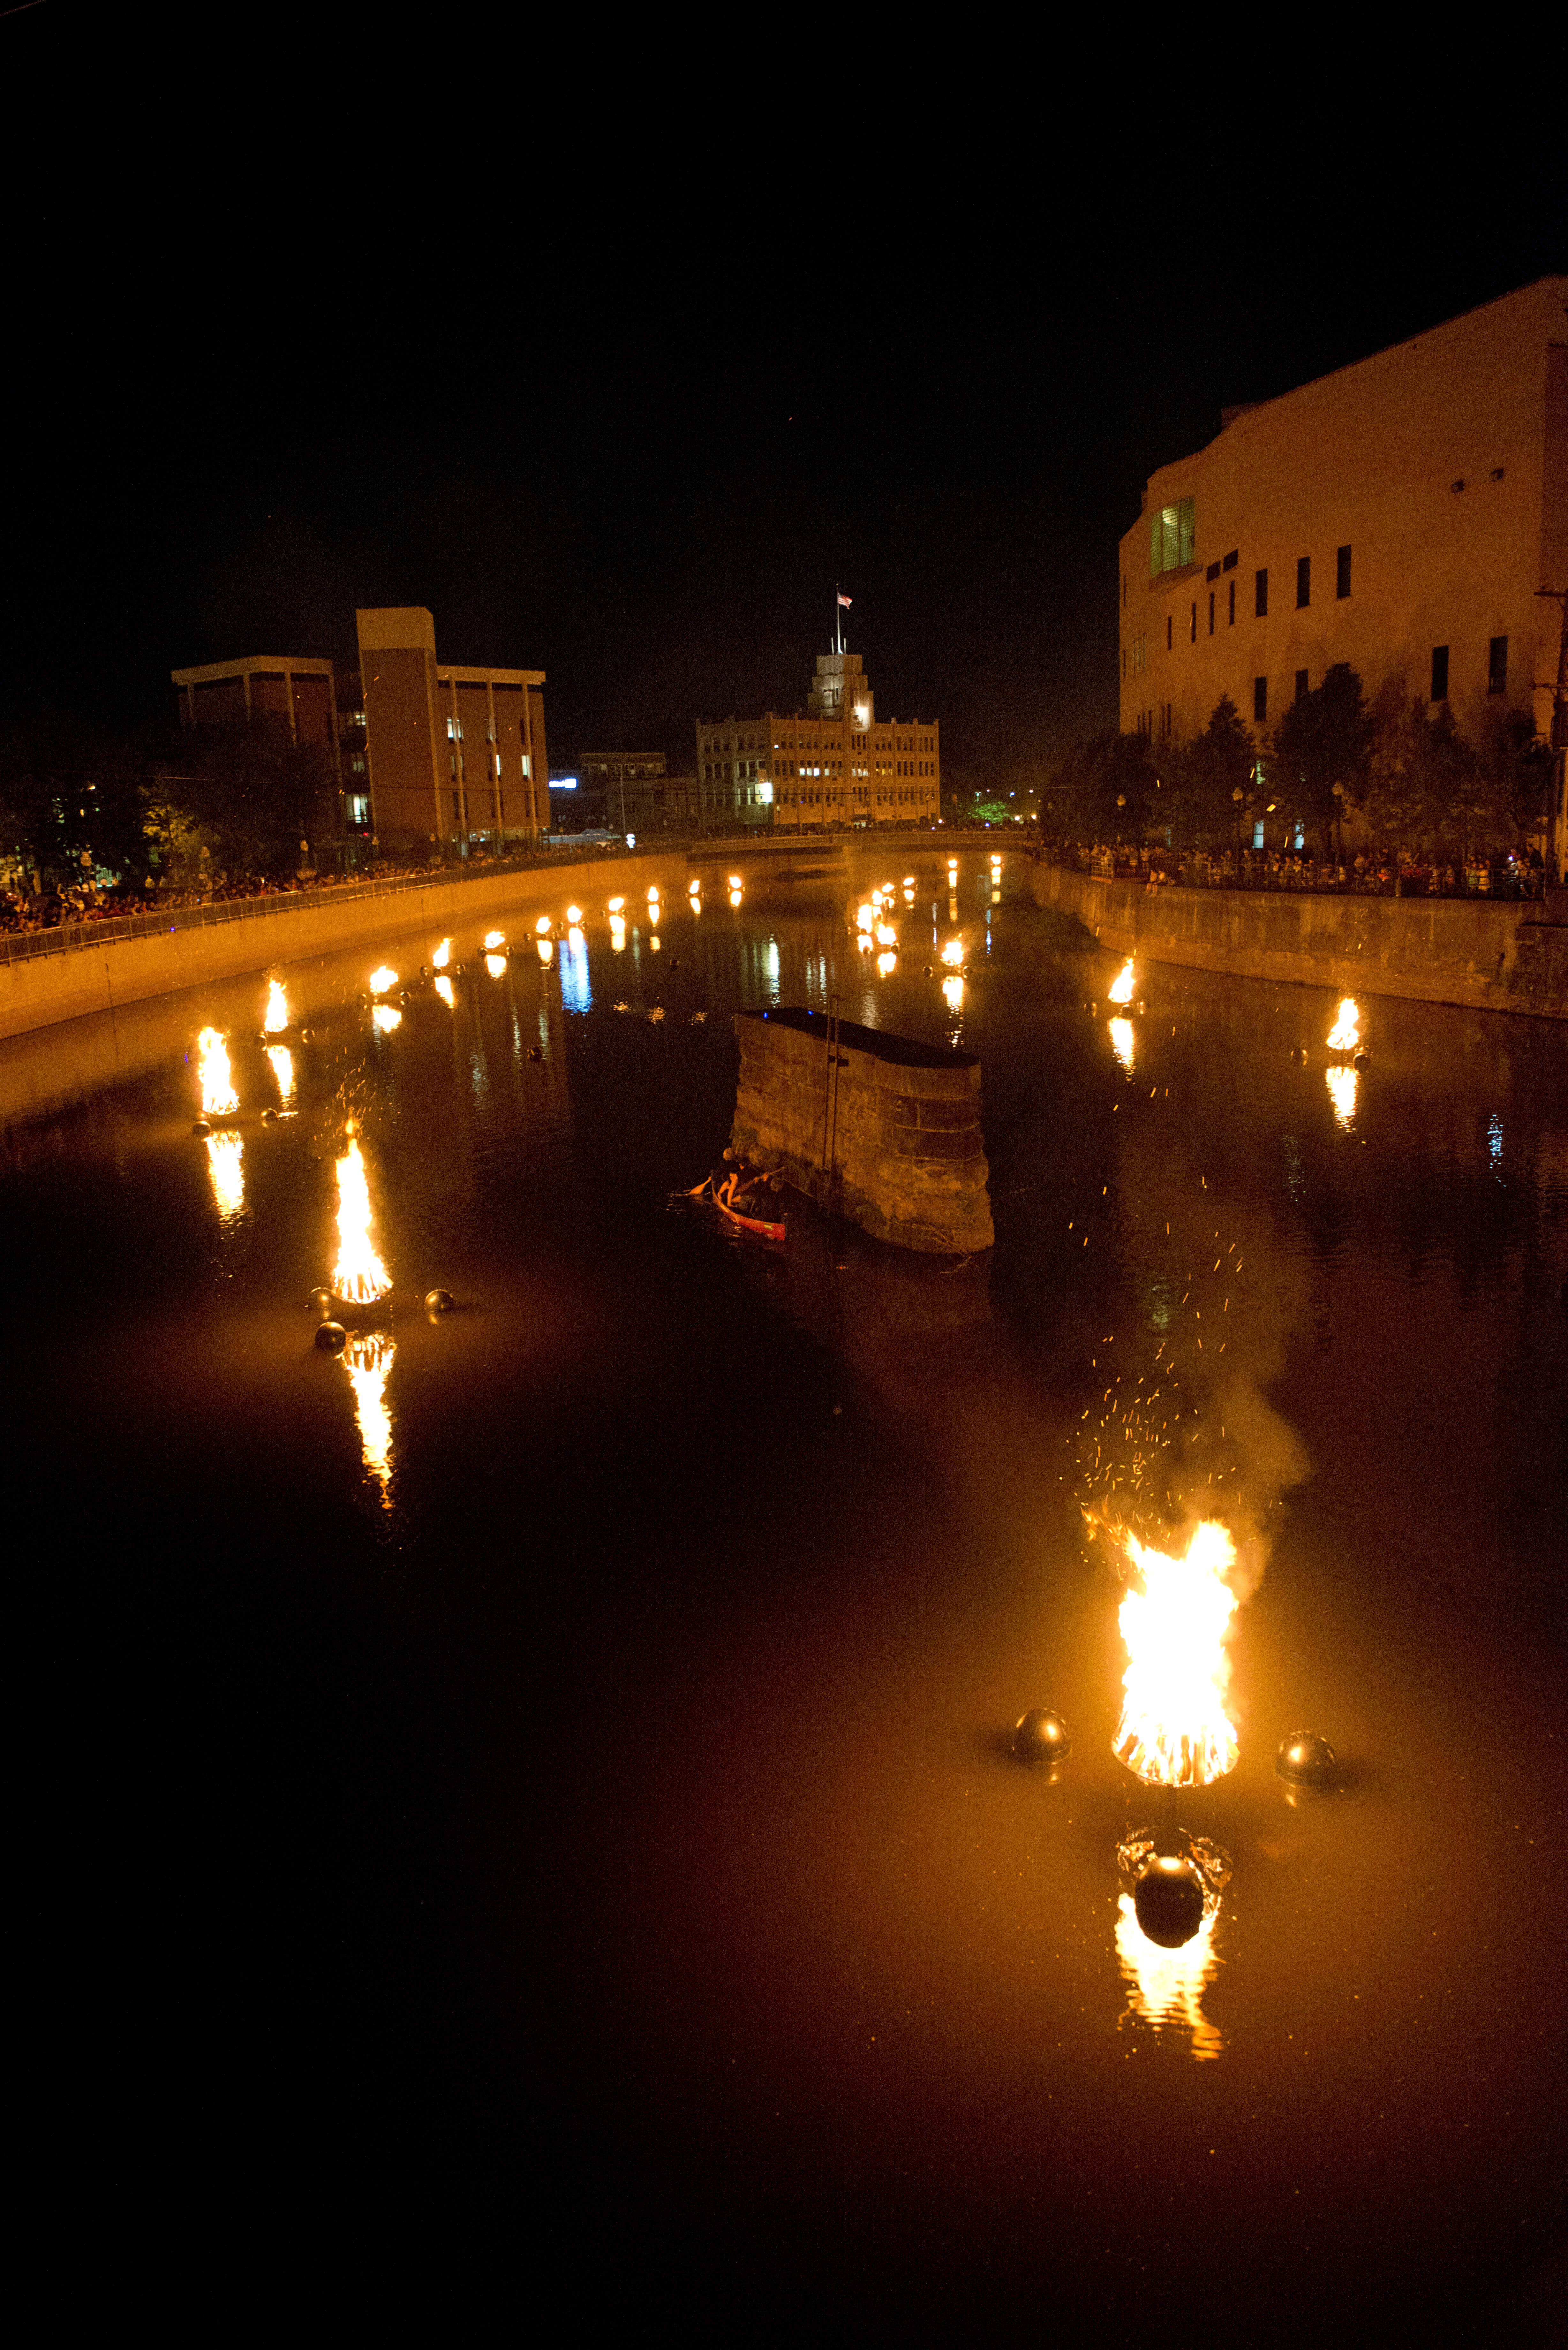 WaterFire Sharon, PA, Pennsylvania’s Top Rated Event, will light the fires one last time in 2019